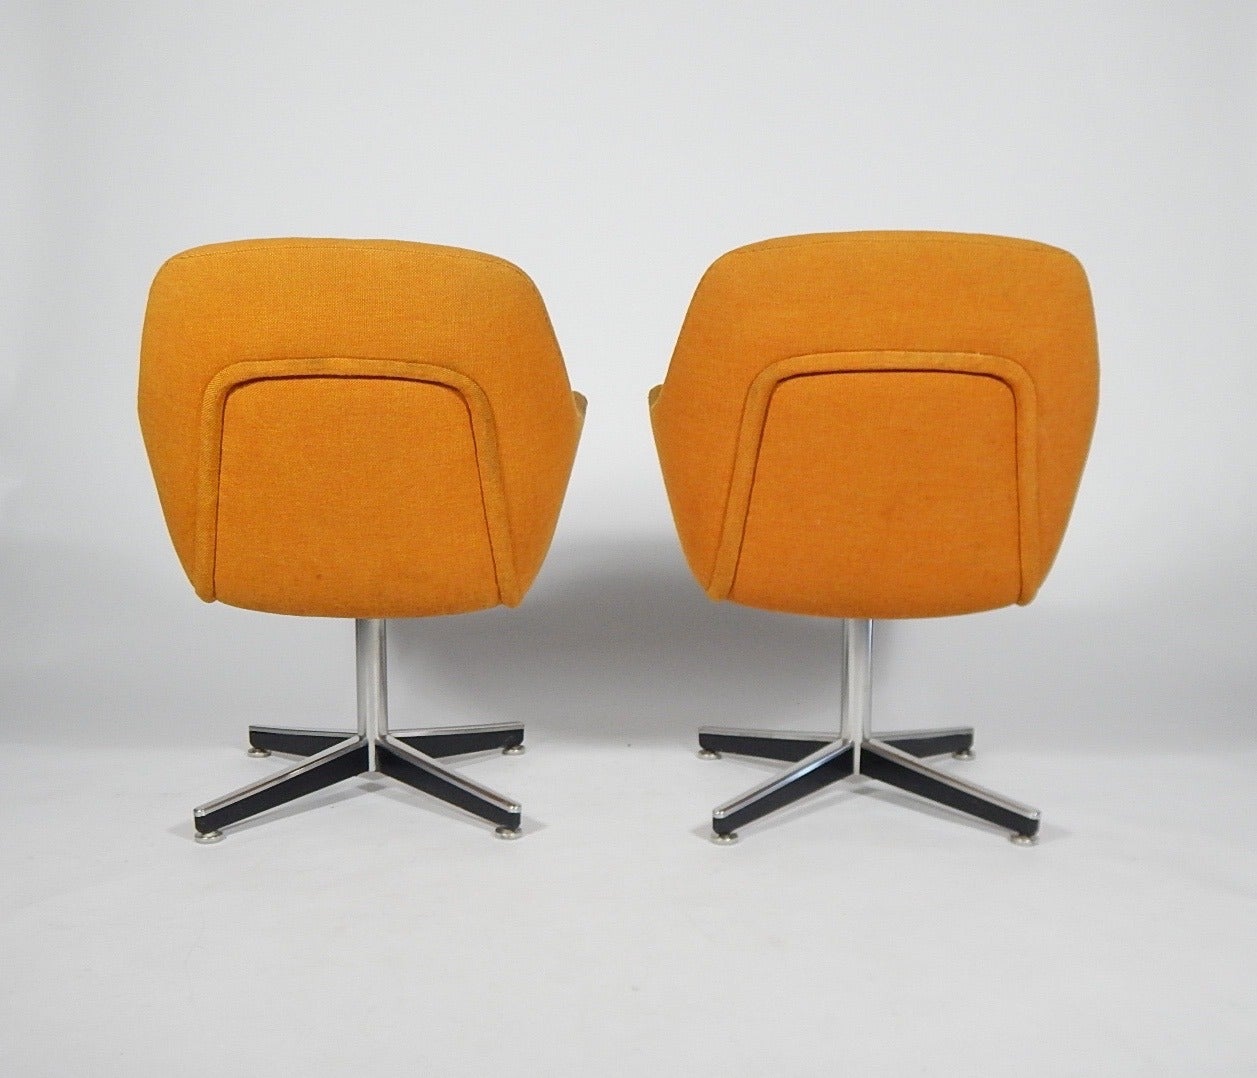 Late 20th Century Max Pearson for Knoll Executive Chair, Original Fabric, 1970s